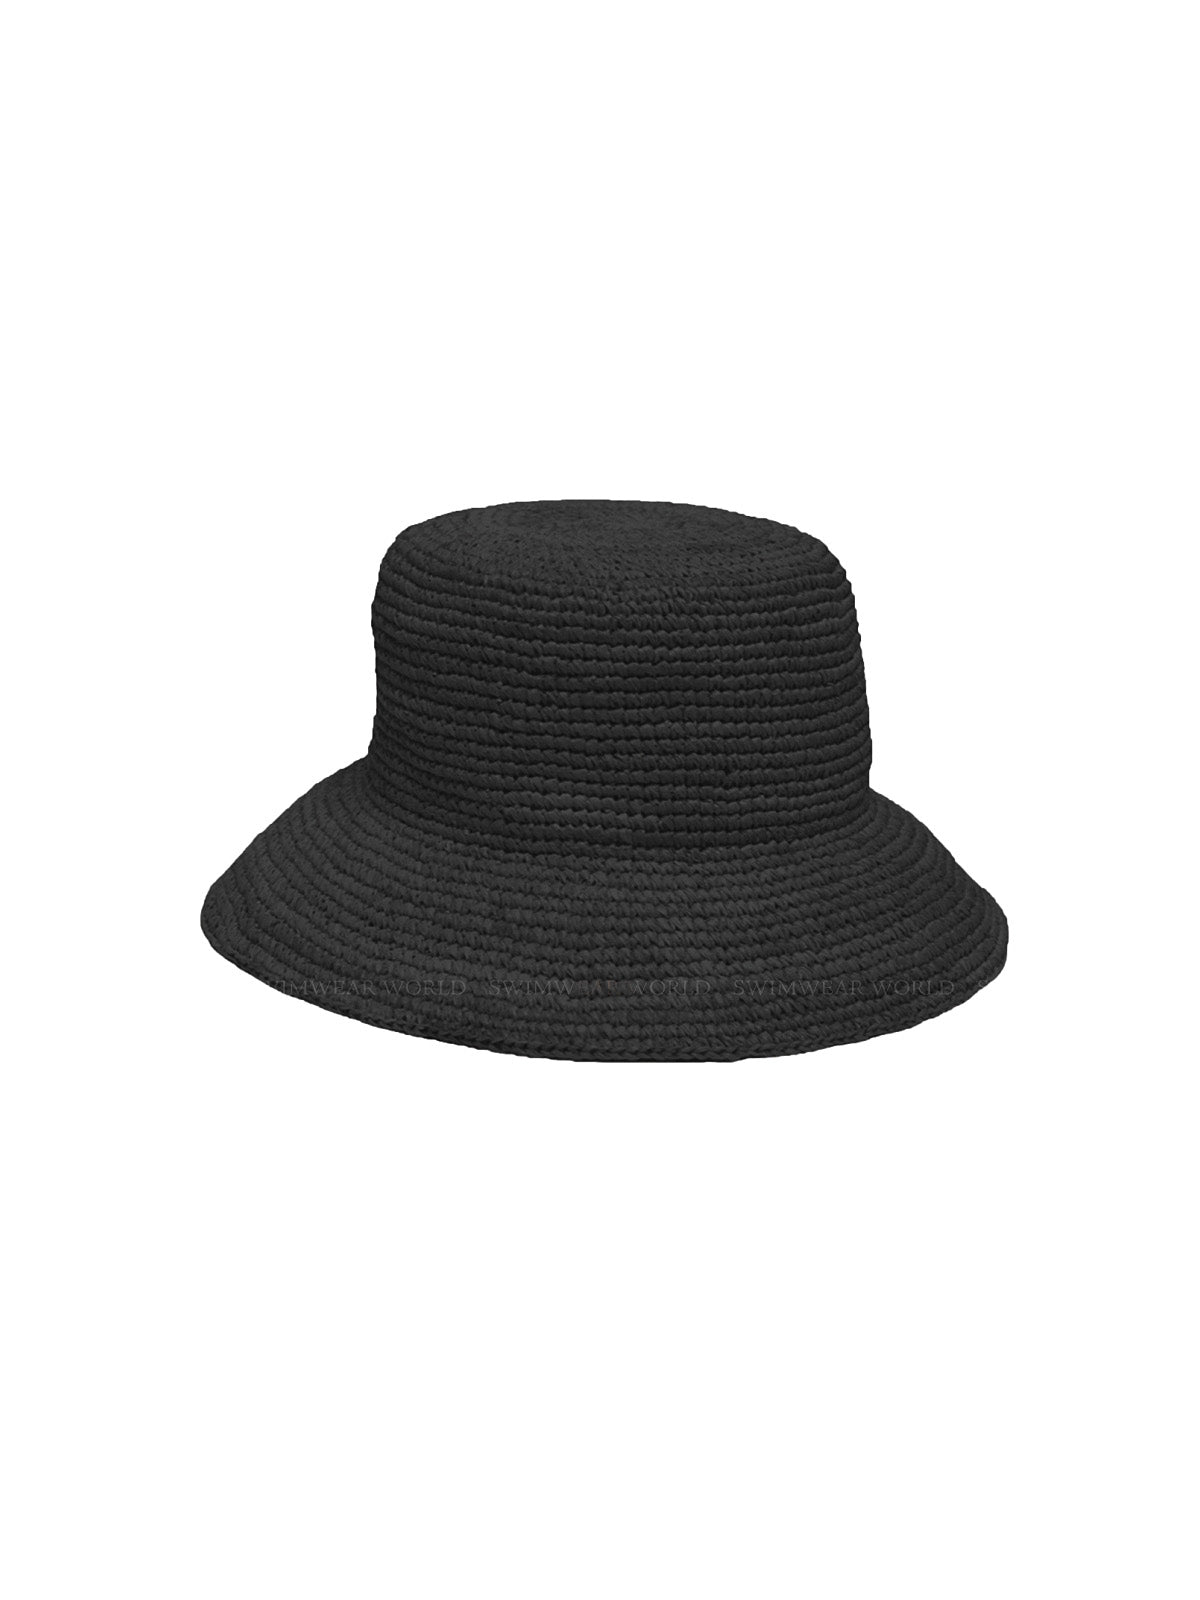 Vitamin A: Cannes Bucket Hat